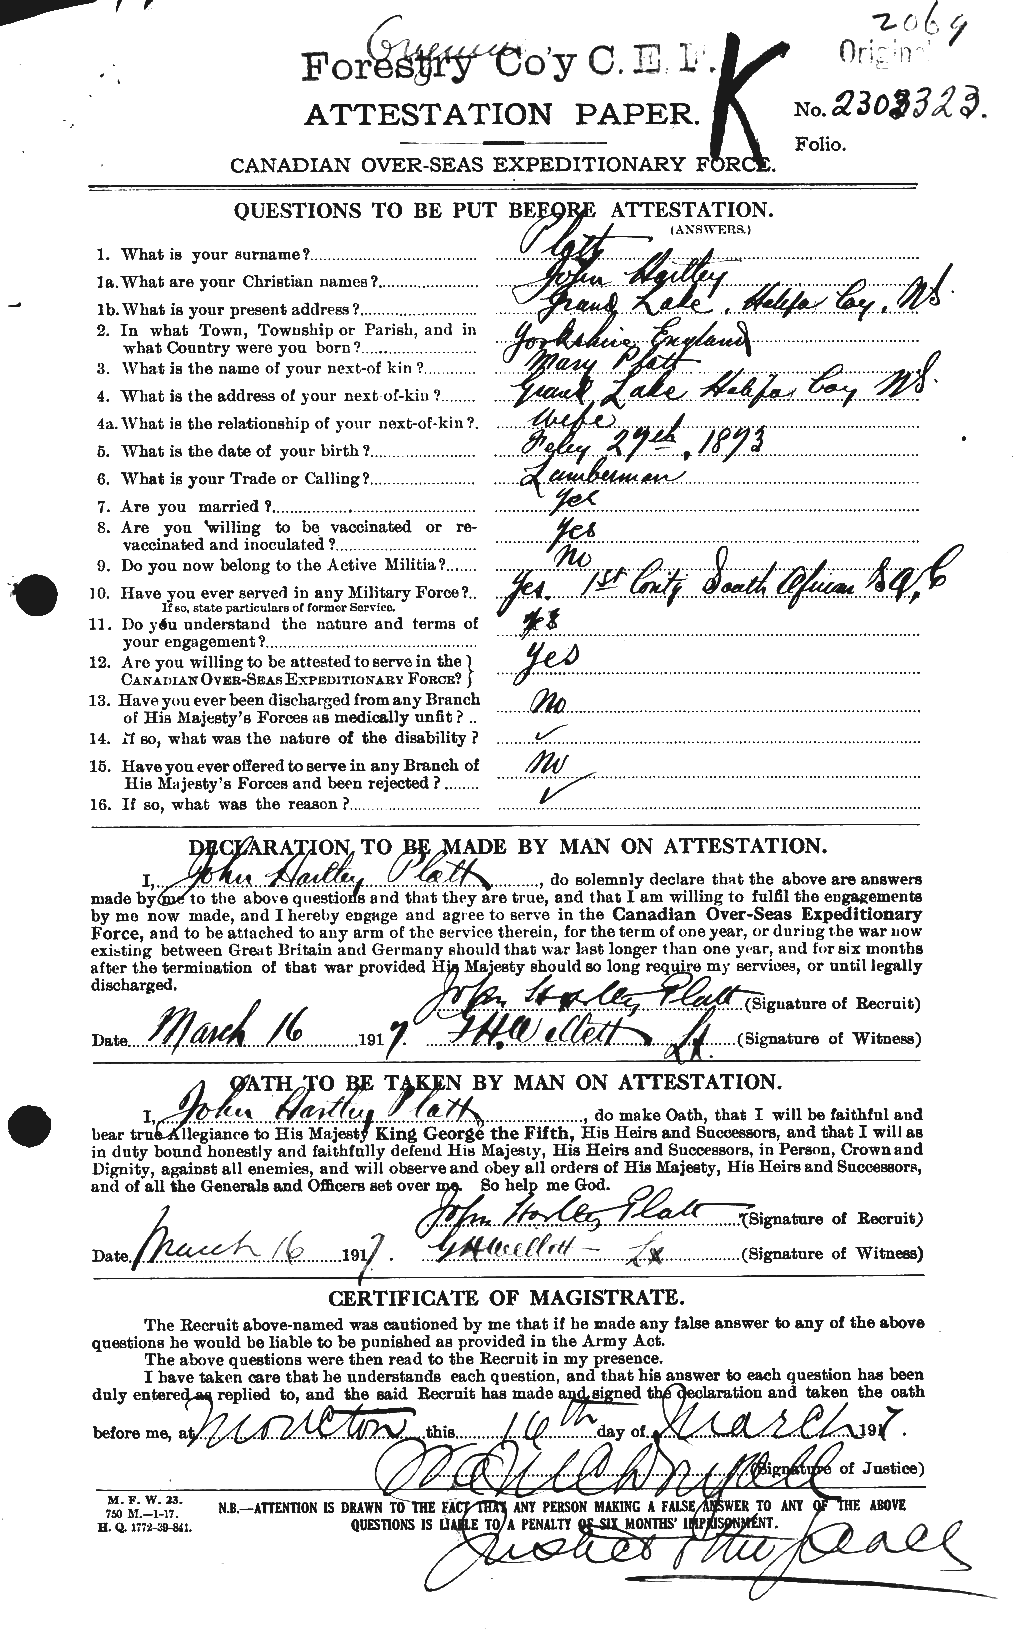 Personnel Records of the First World War - CEF 580205a